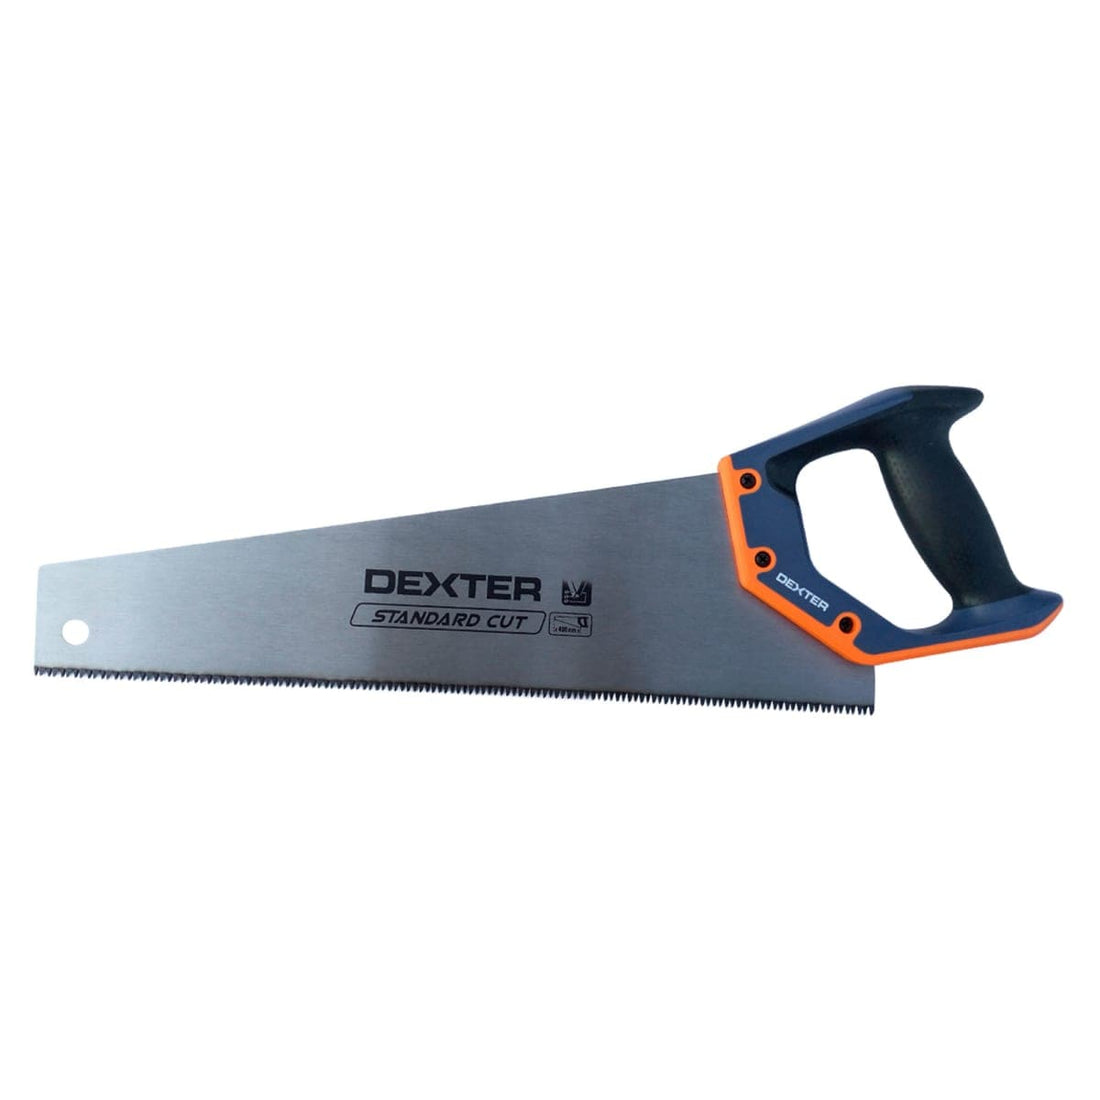 DEXTER 400 MM SAW FOR WOOD RUBBER GRIP,STEEL BLADE MEDIUM TOOTHING